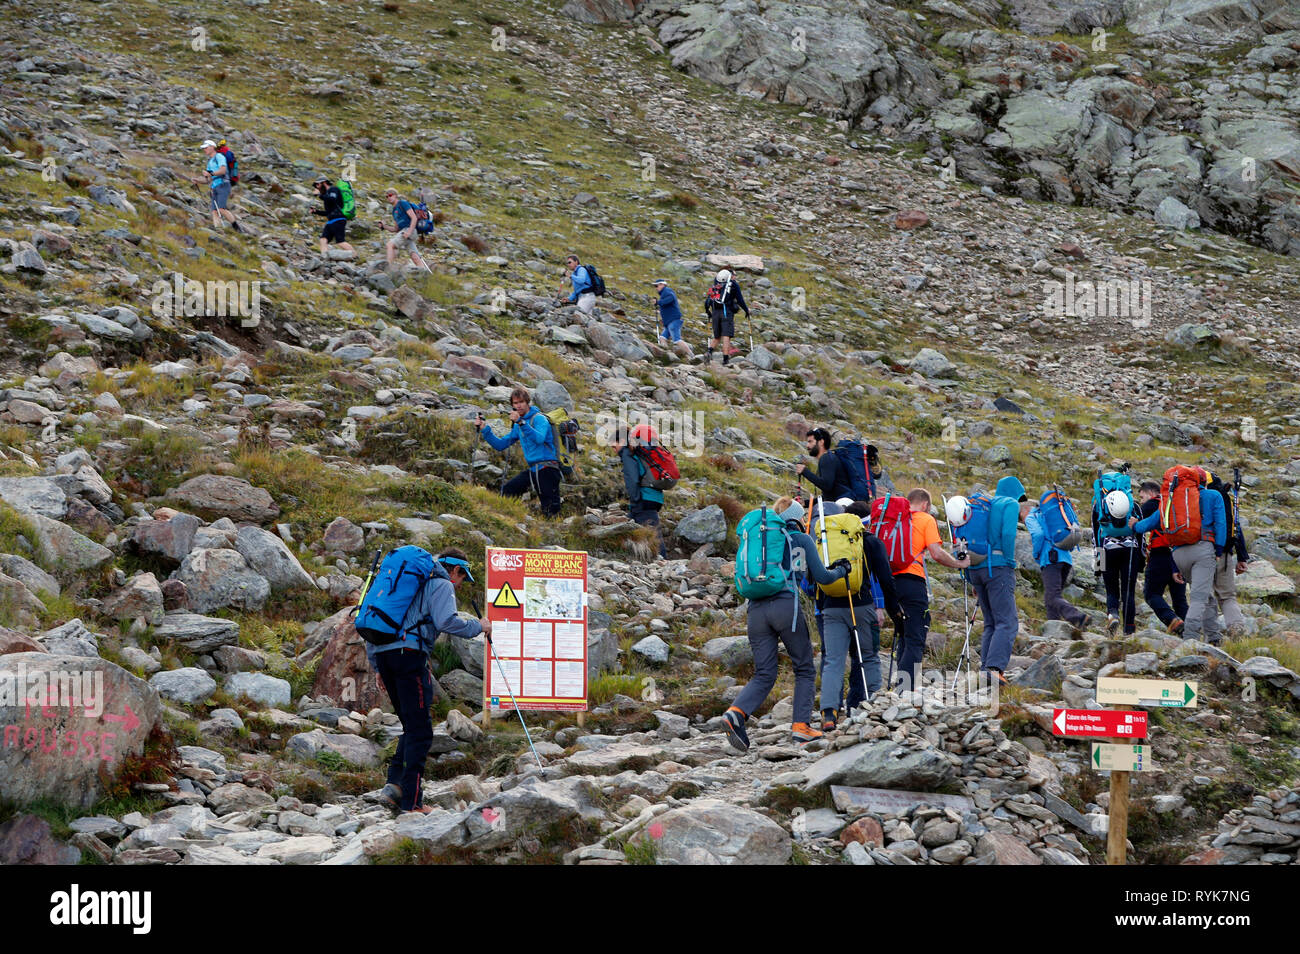 Alpinists during the ascent of Mont Blanc along the regular route via Gouter Refuge.  Local Bye-Law. Regulated Access to Mont Blanc sign.  France. Stock Photo